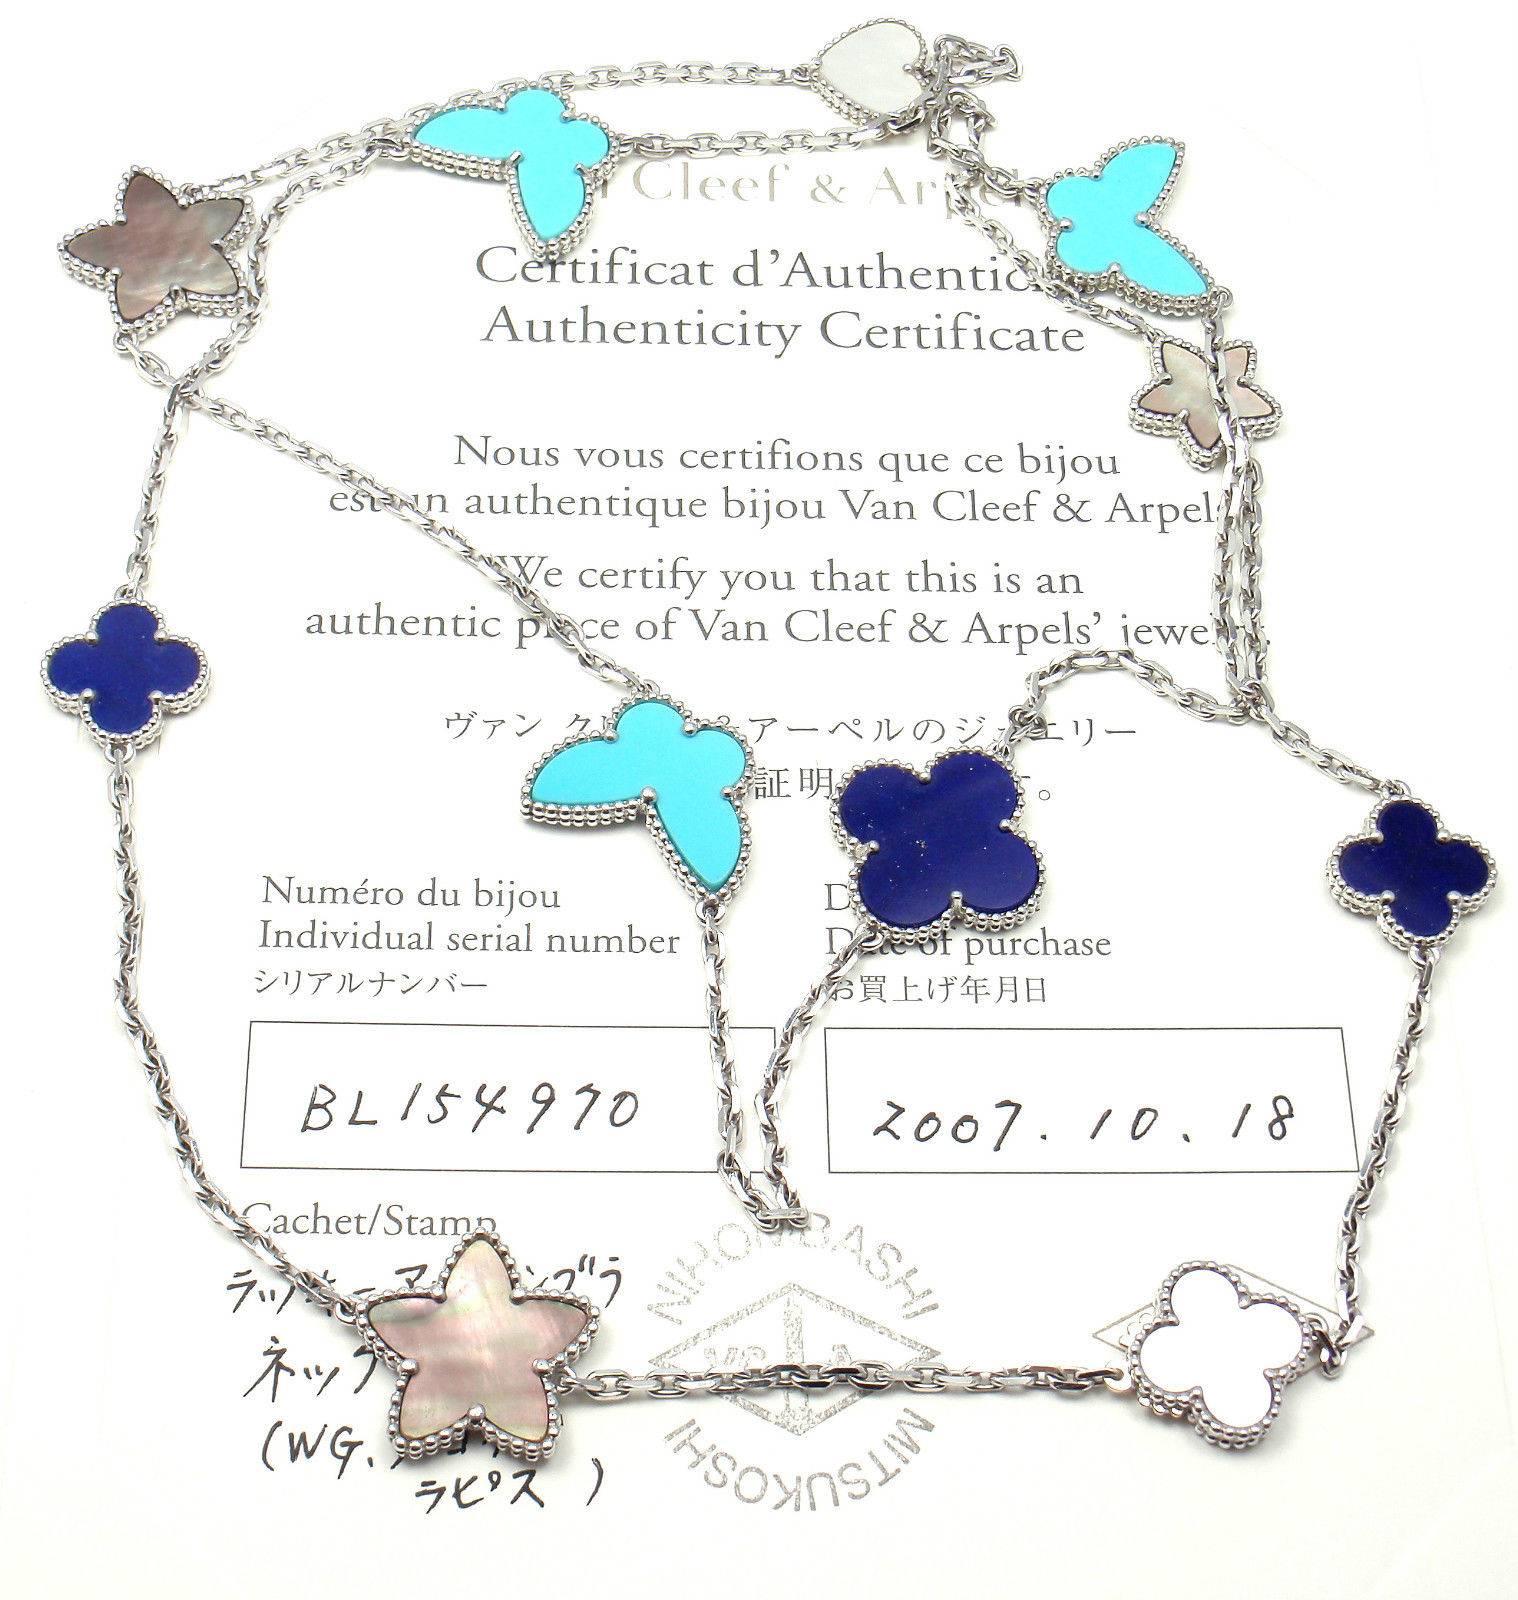 18k White Gold Lucky Alhambra Turquoise Lapis Mother of Pearl Necklace by  Van Cleef & Arpels.
With3 butterfly turquoise stones
3 lapis stones
3 grey mother of pearl stones
2 white mother of pearl stones 
Details:  
Length: 32